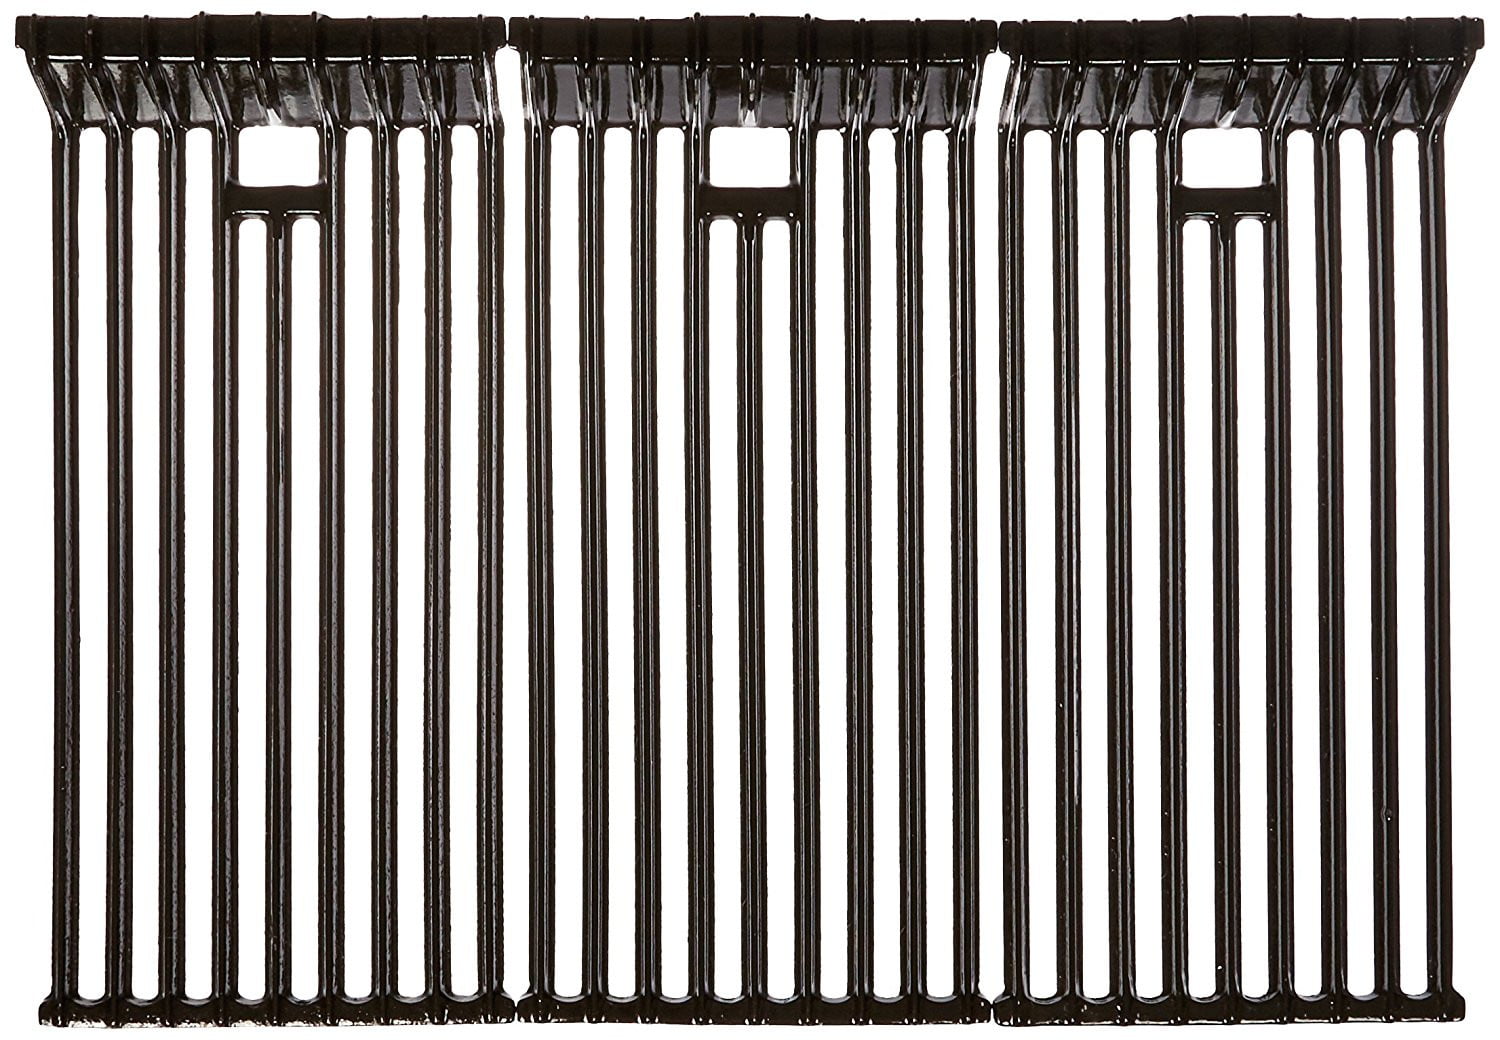 Gloss cast iron cooking grid for Broilmaster brand gas grills